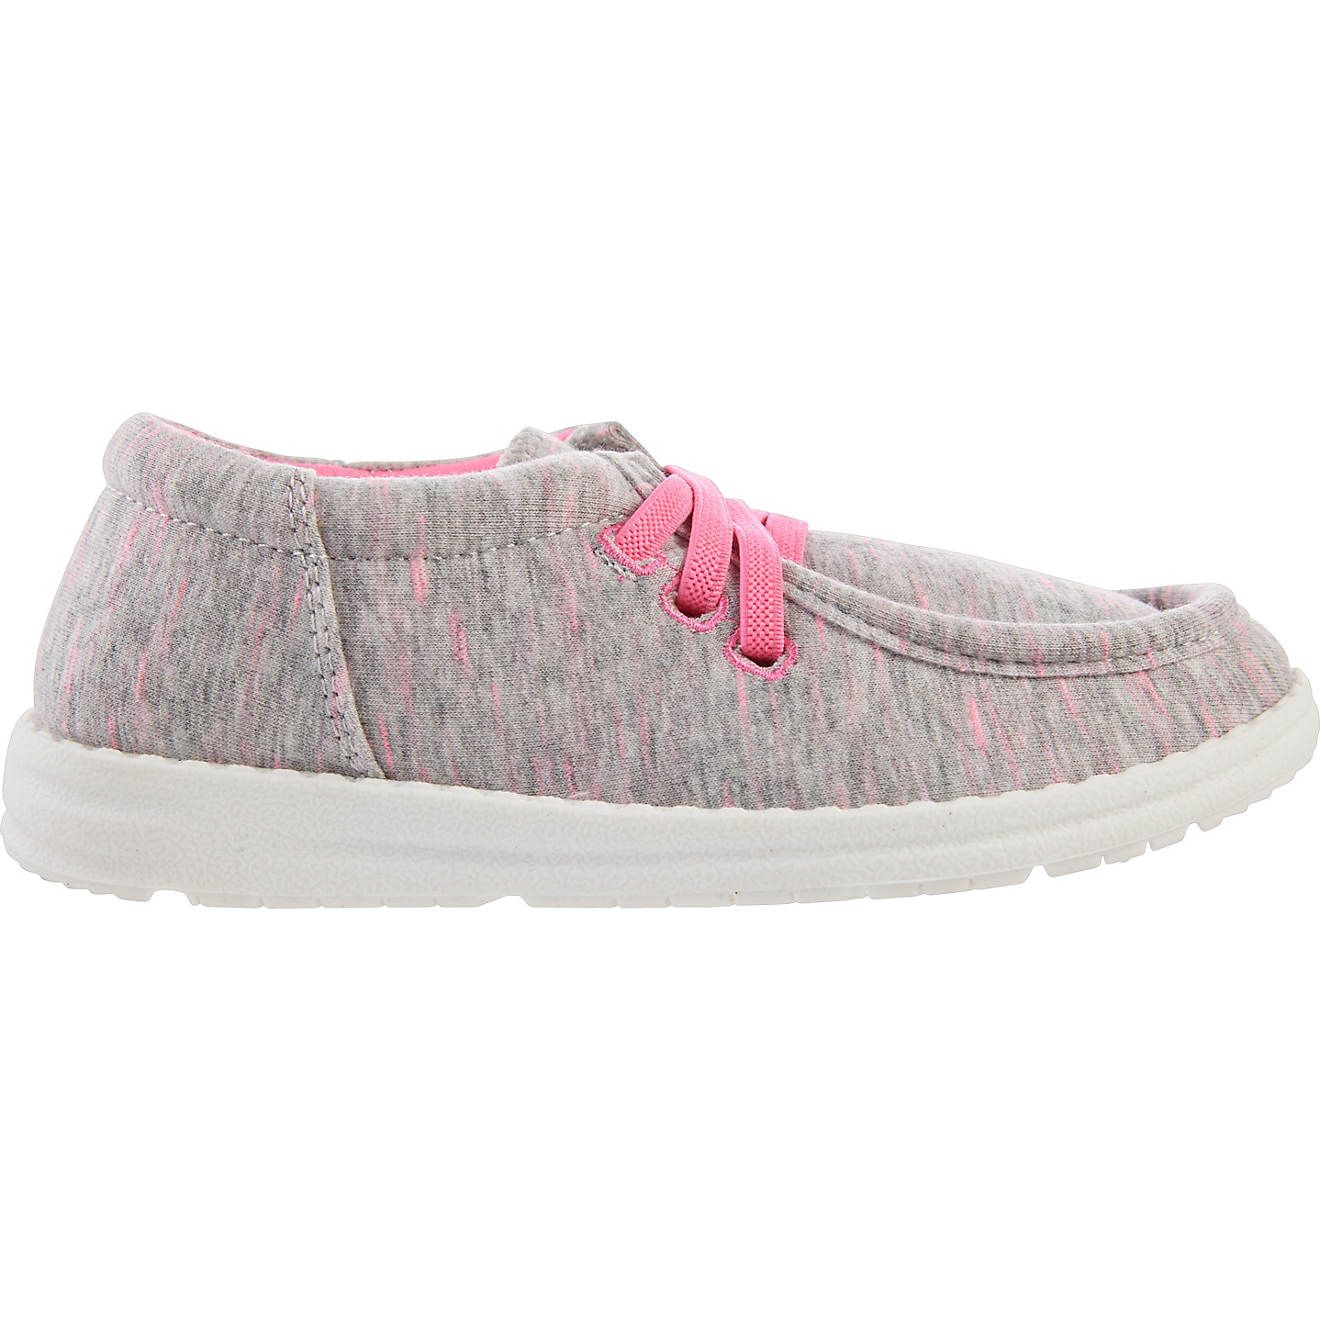 Magellan Outdoors Girls’ Moc Toe Shoes | Academy | Academy Sports + Outdoors